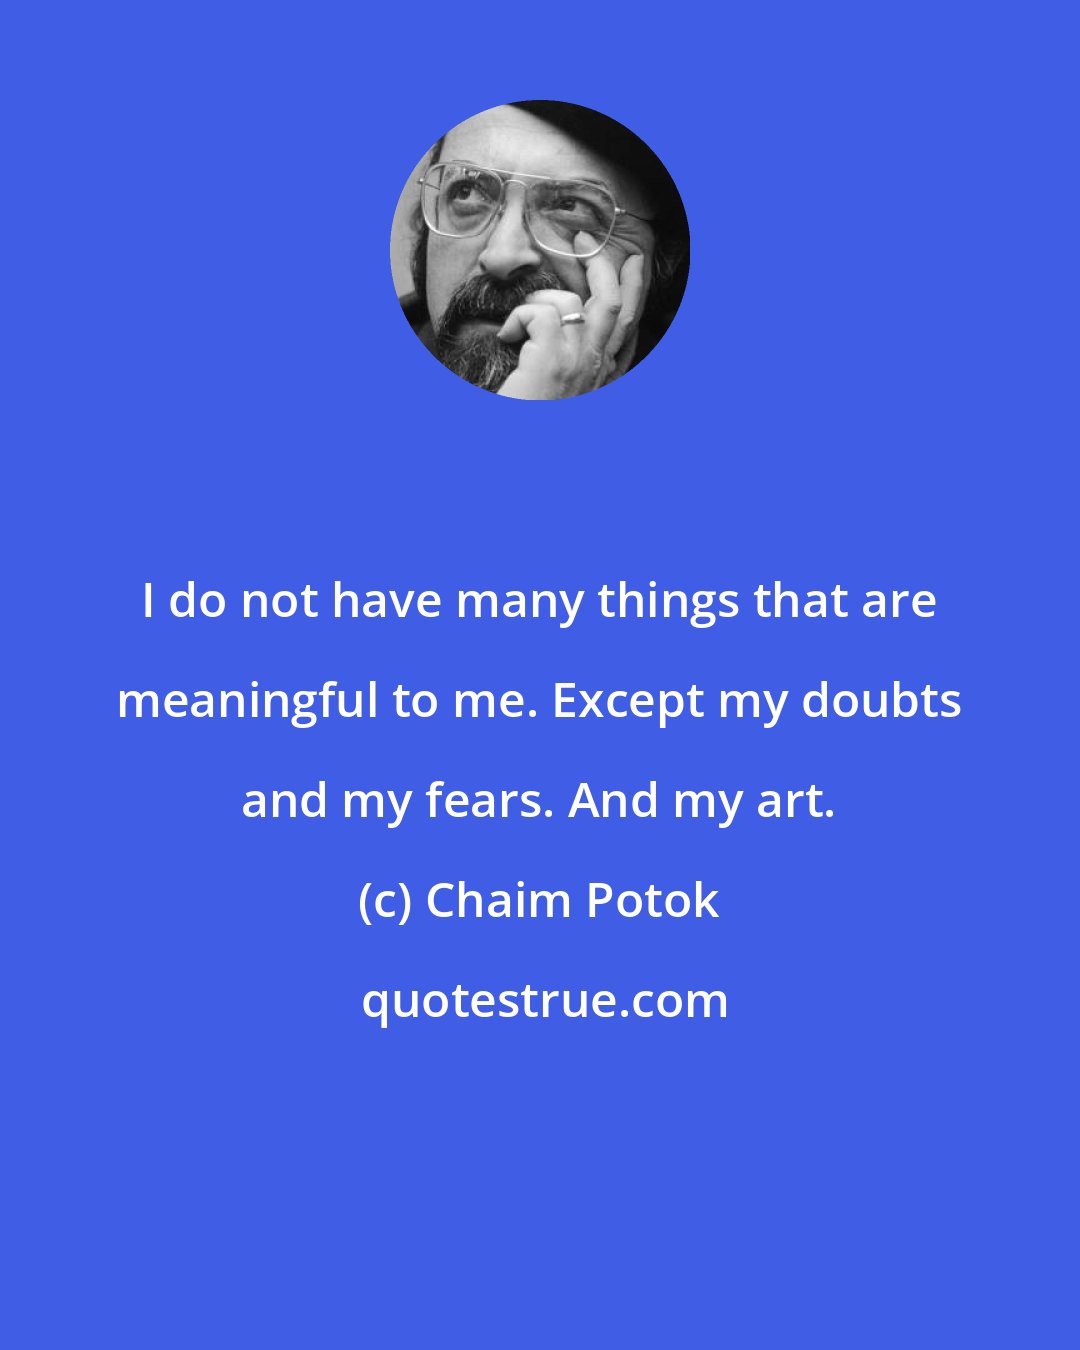 Chaim Potok: I do not have many things that are meaningful to me. Except my doubts and my fears. And my art.